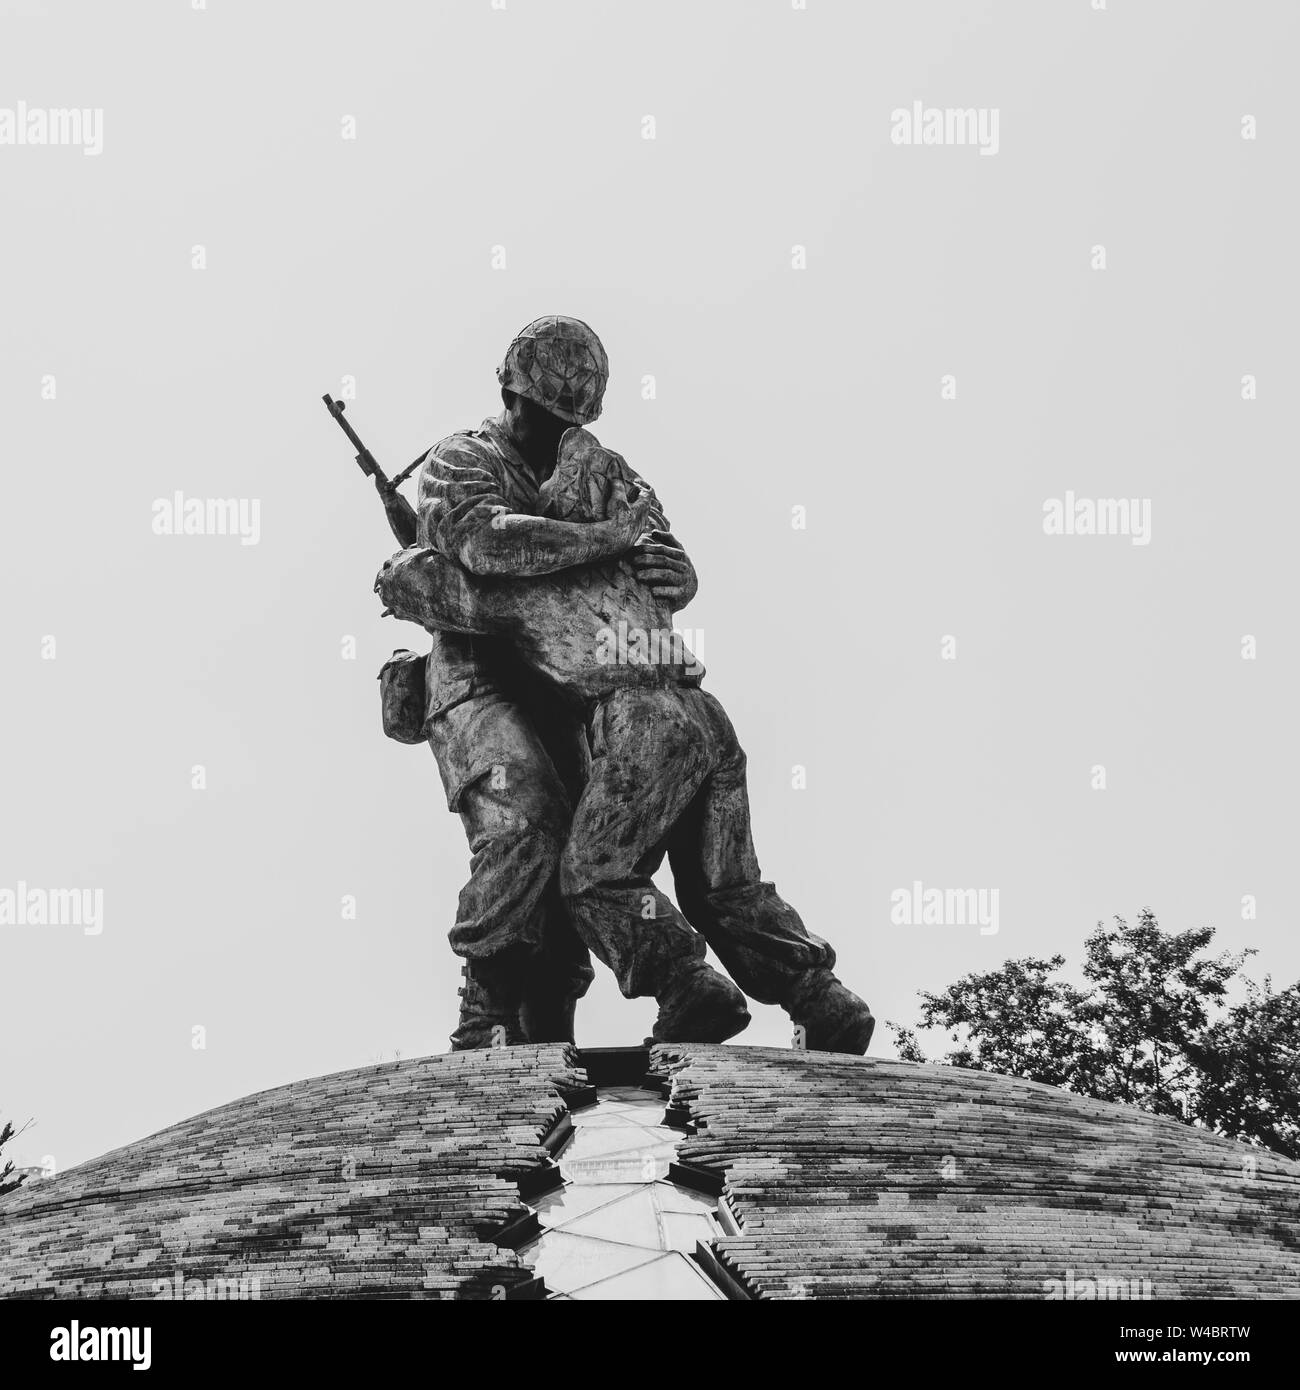 View on Statue of Brothers inside War Memorial of Korea and peaceful reunification. Yongsan, Seoul, South Korea, Asia. Stock Photo